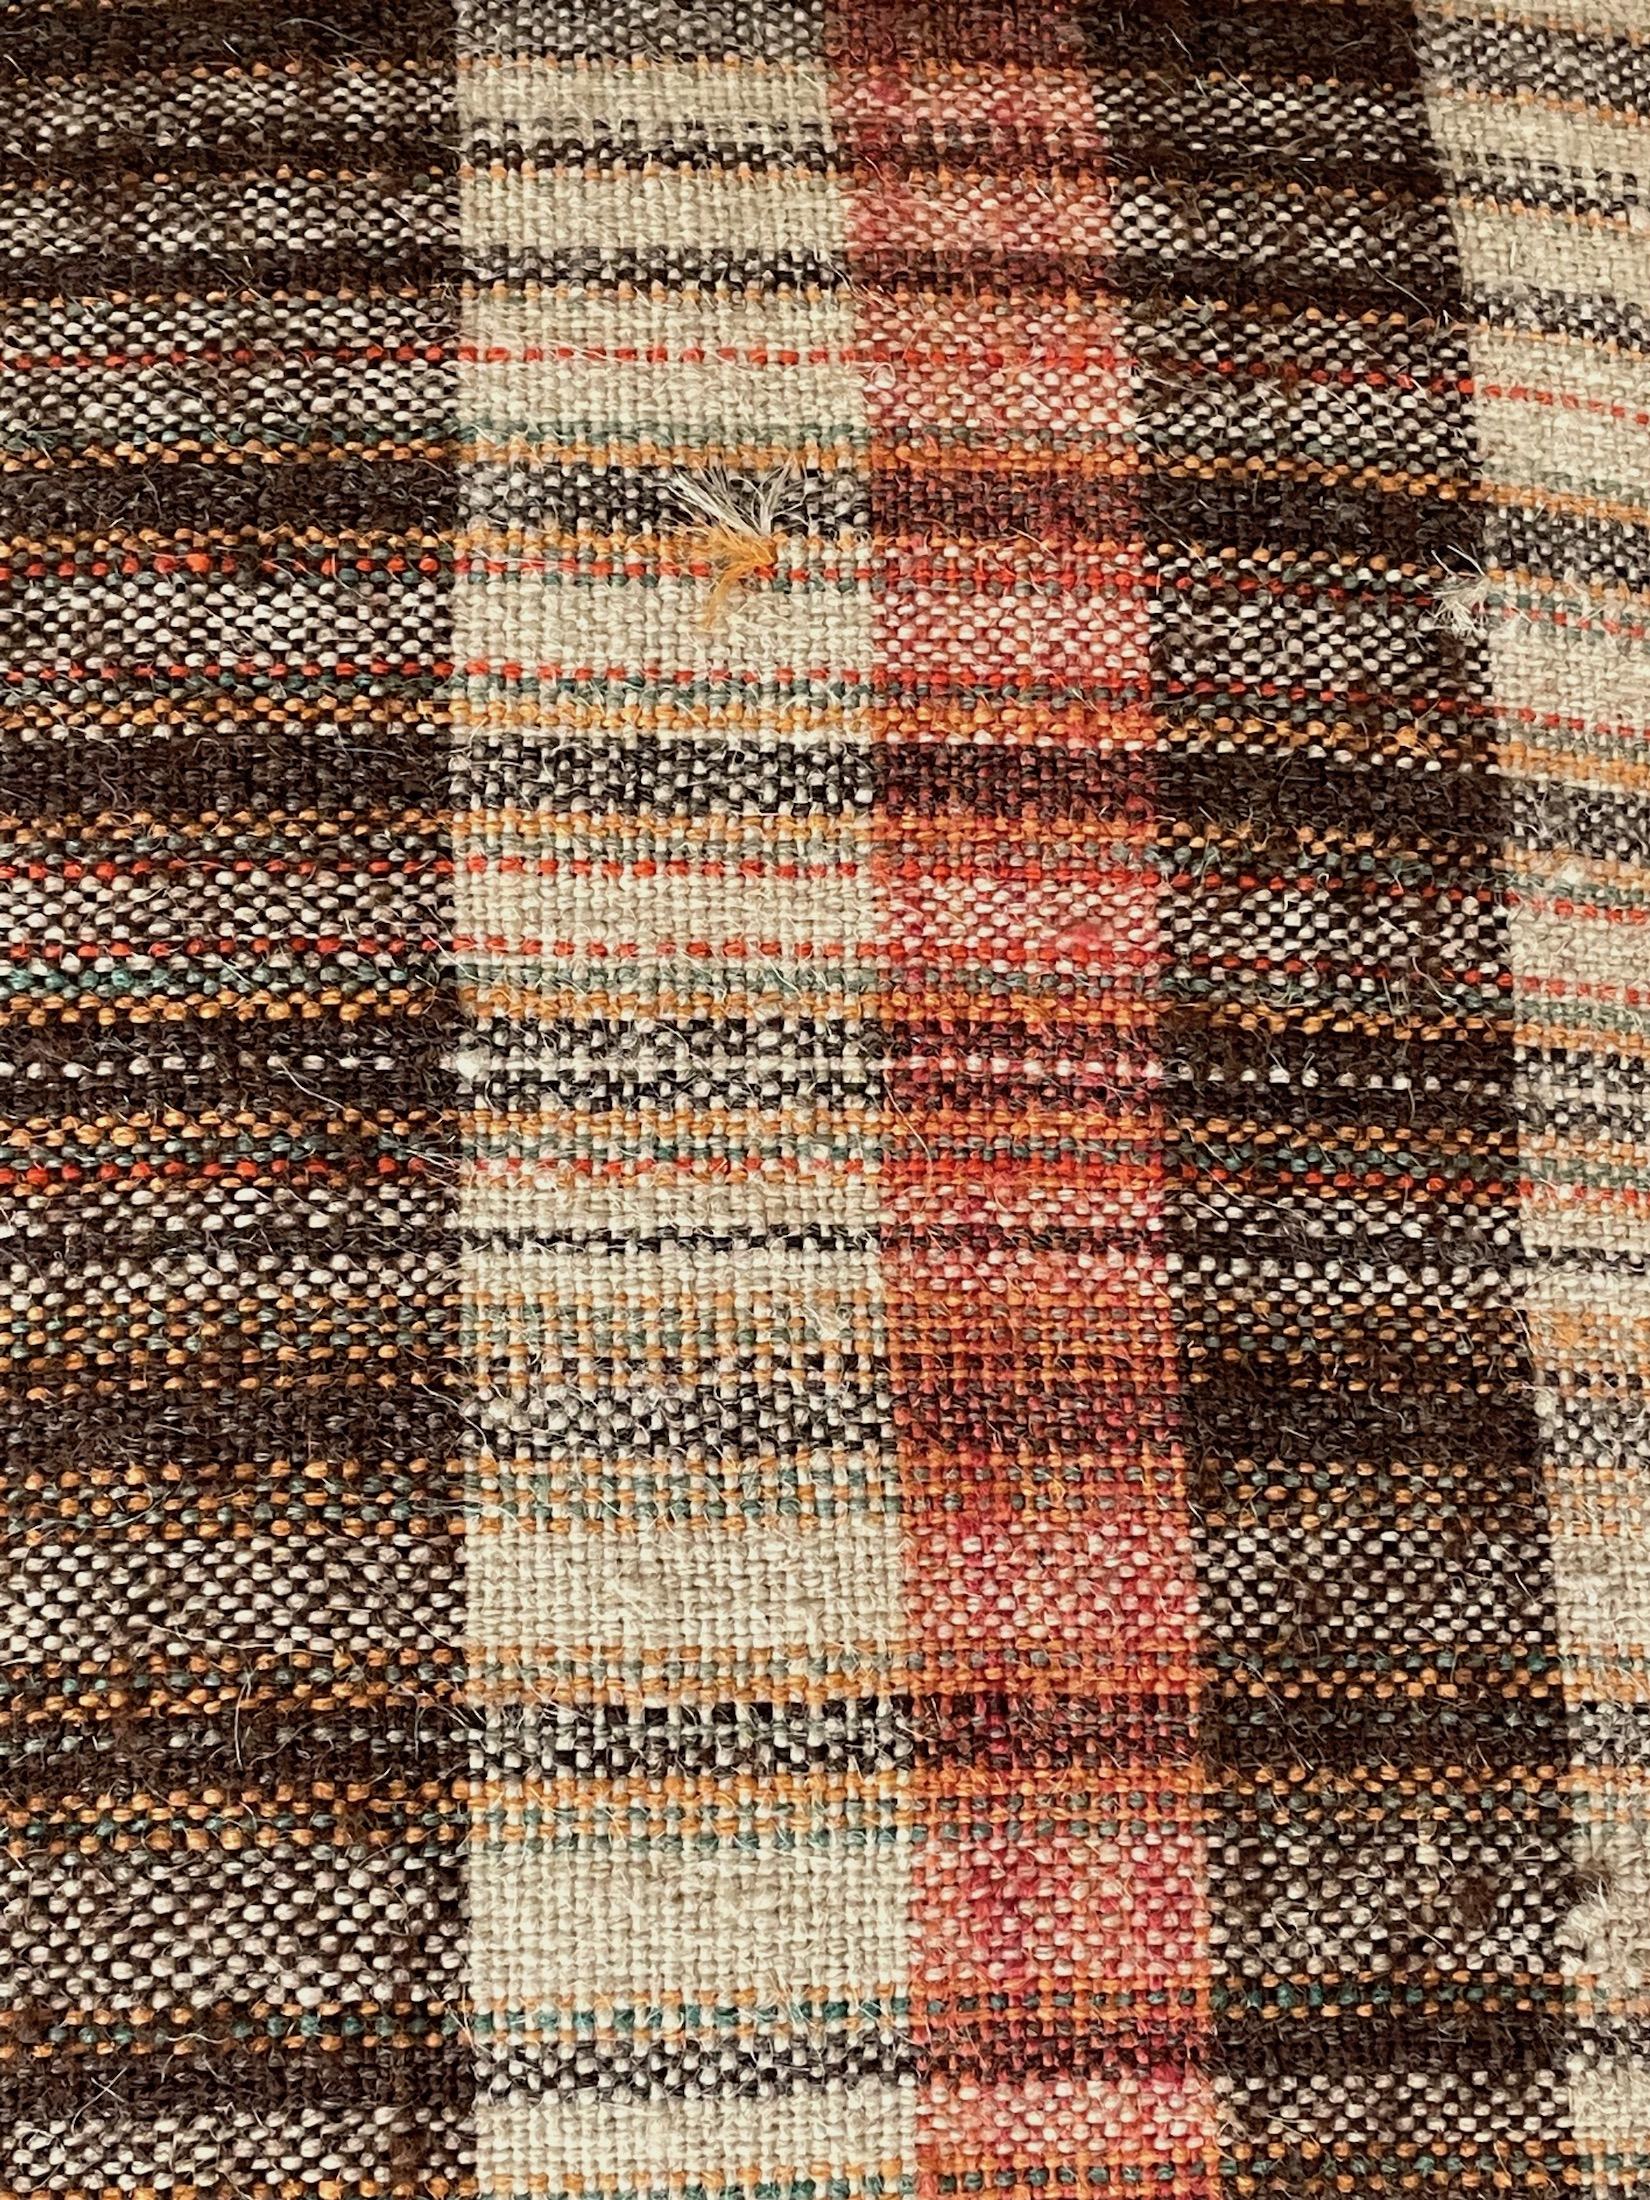 Midcentury Portuguese pillow made from handwoven fabric used originally as flour sacks.
New down and feather insert.
Brown, cream and rose stripes.